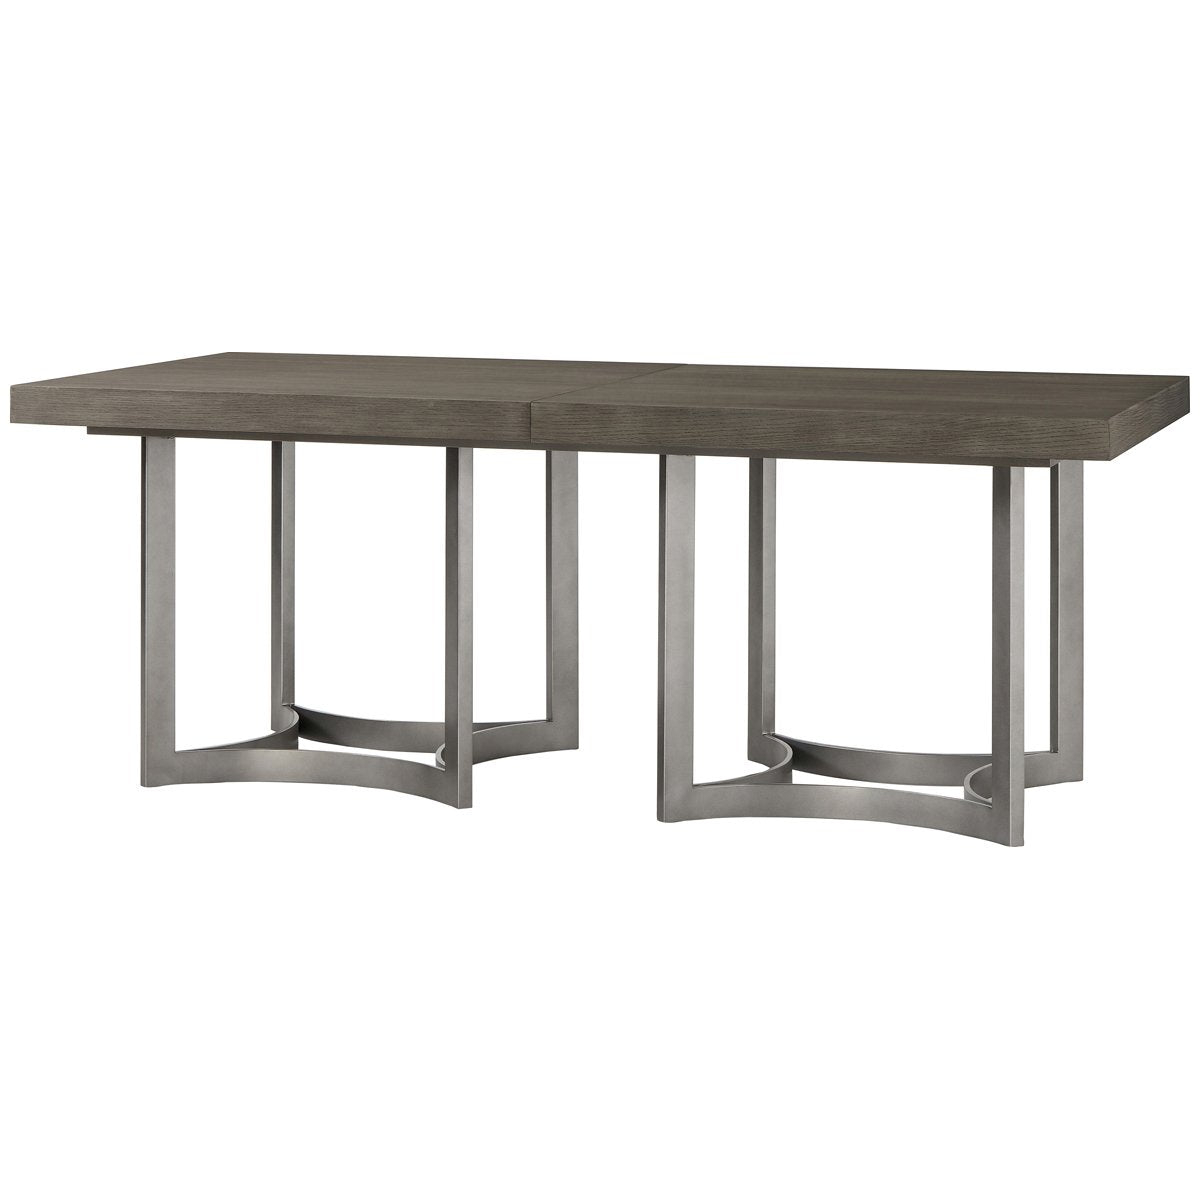 Sonder Living Paxton 80-Inch Dining Table - Extendable